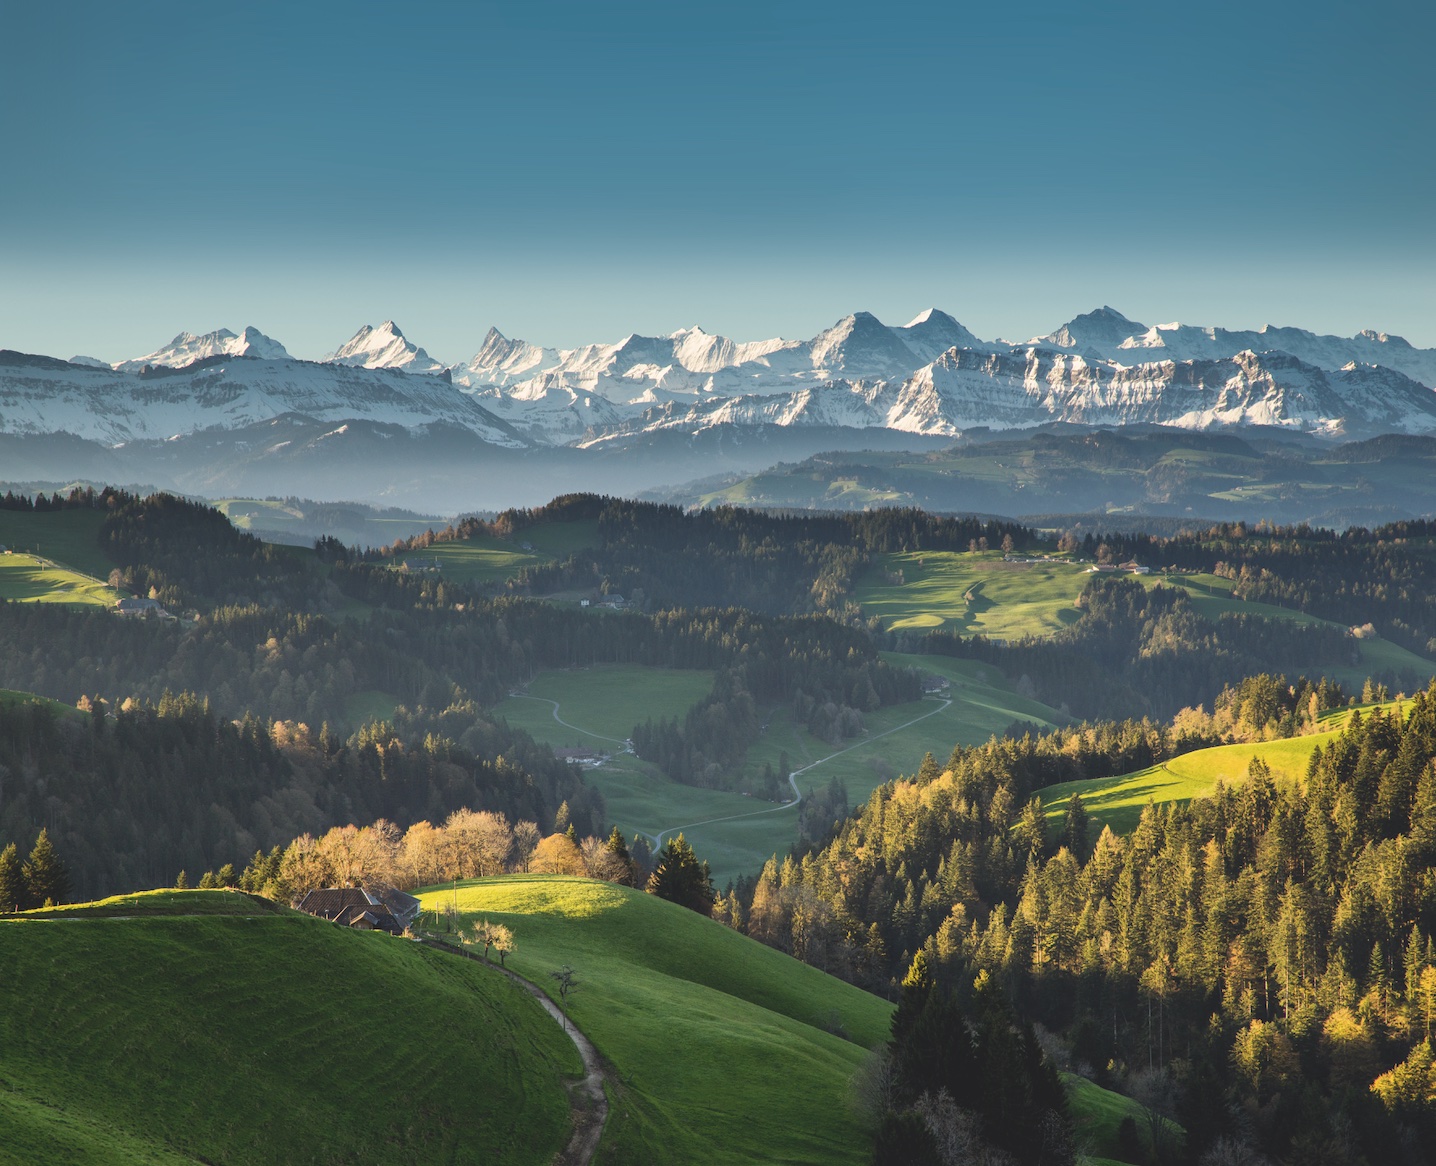 Forests, lush meadows and breathtaking views of the Bernese Alps and Jura mountains captivate travelers exploring the hilly Emmental Region. Switzerland Tourism/Jan Geerk